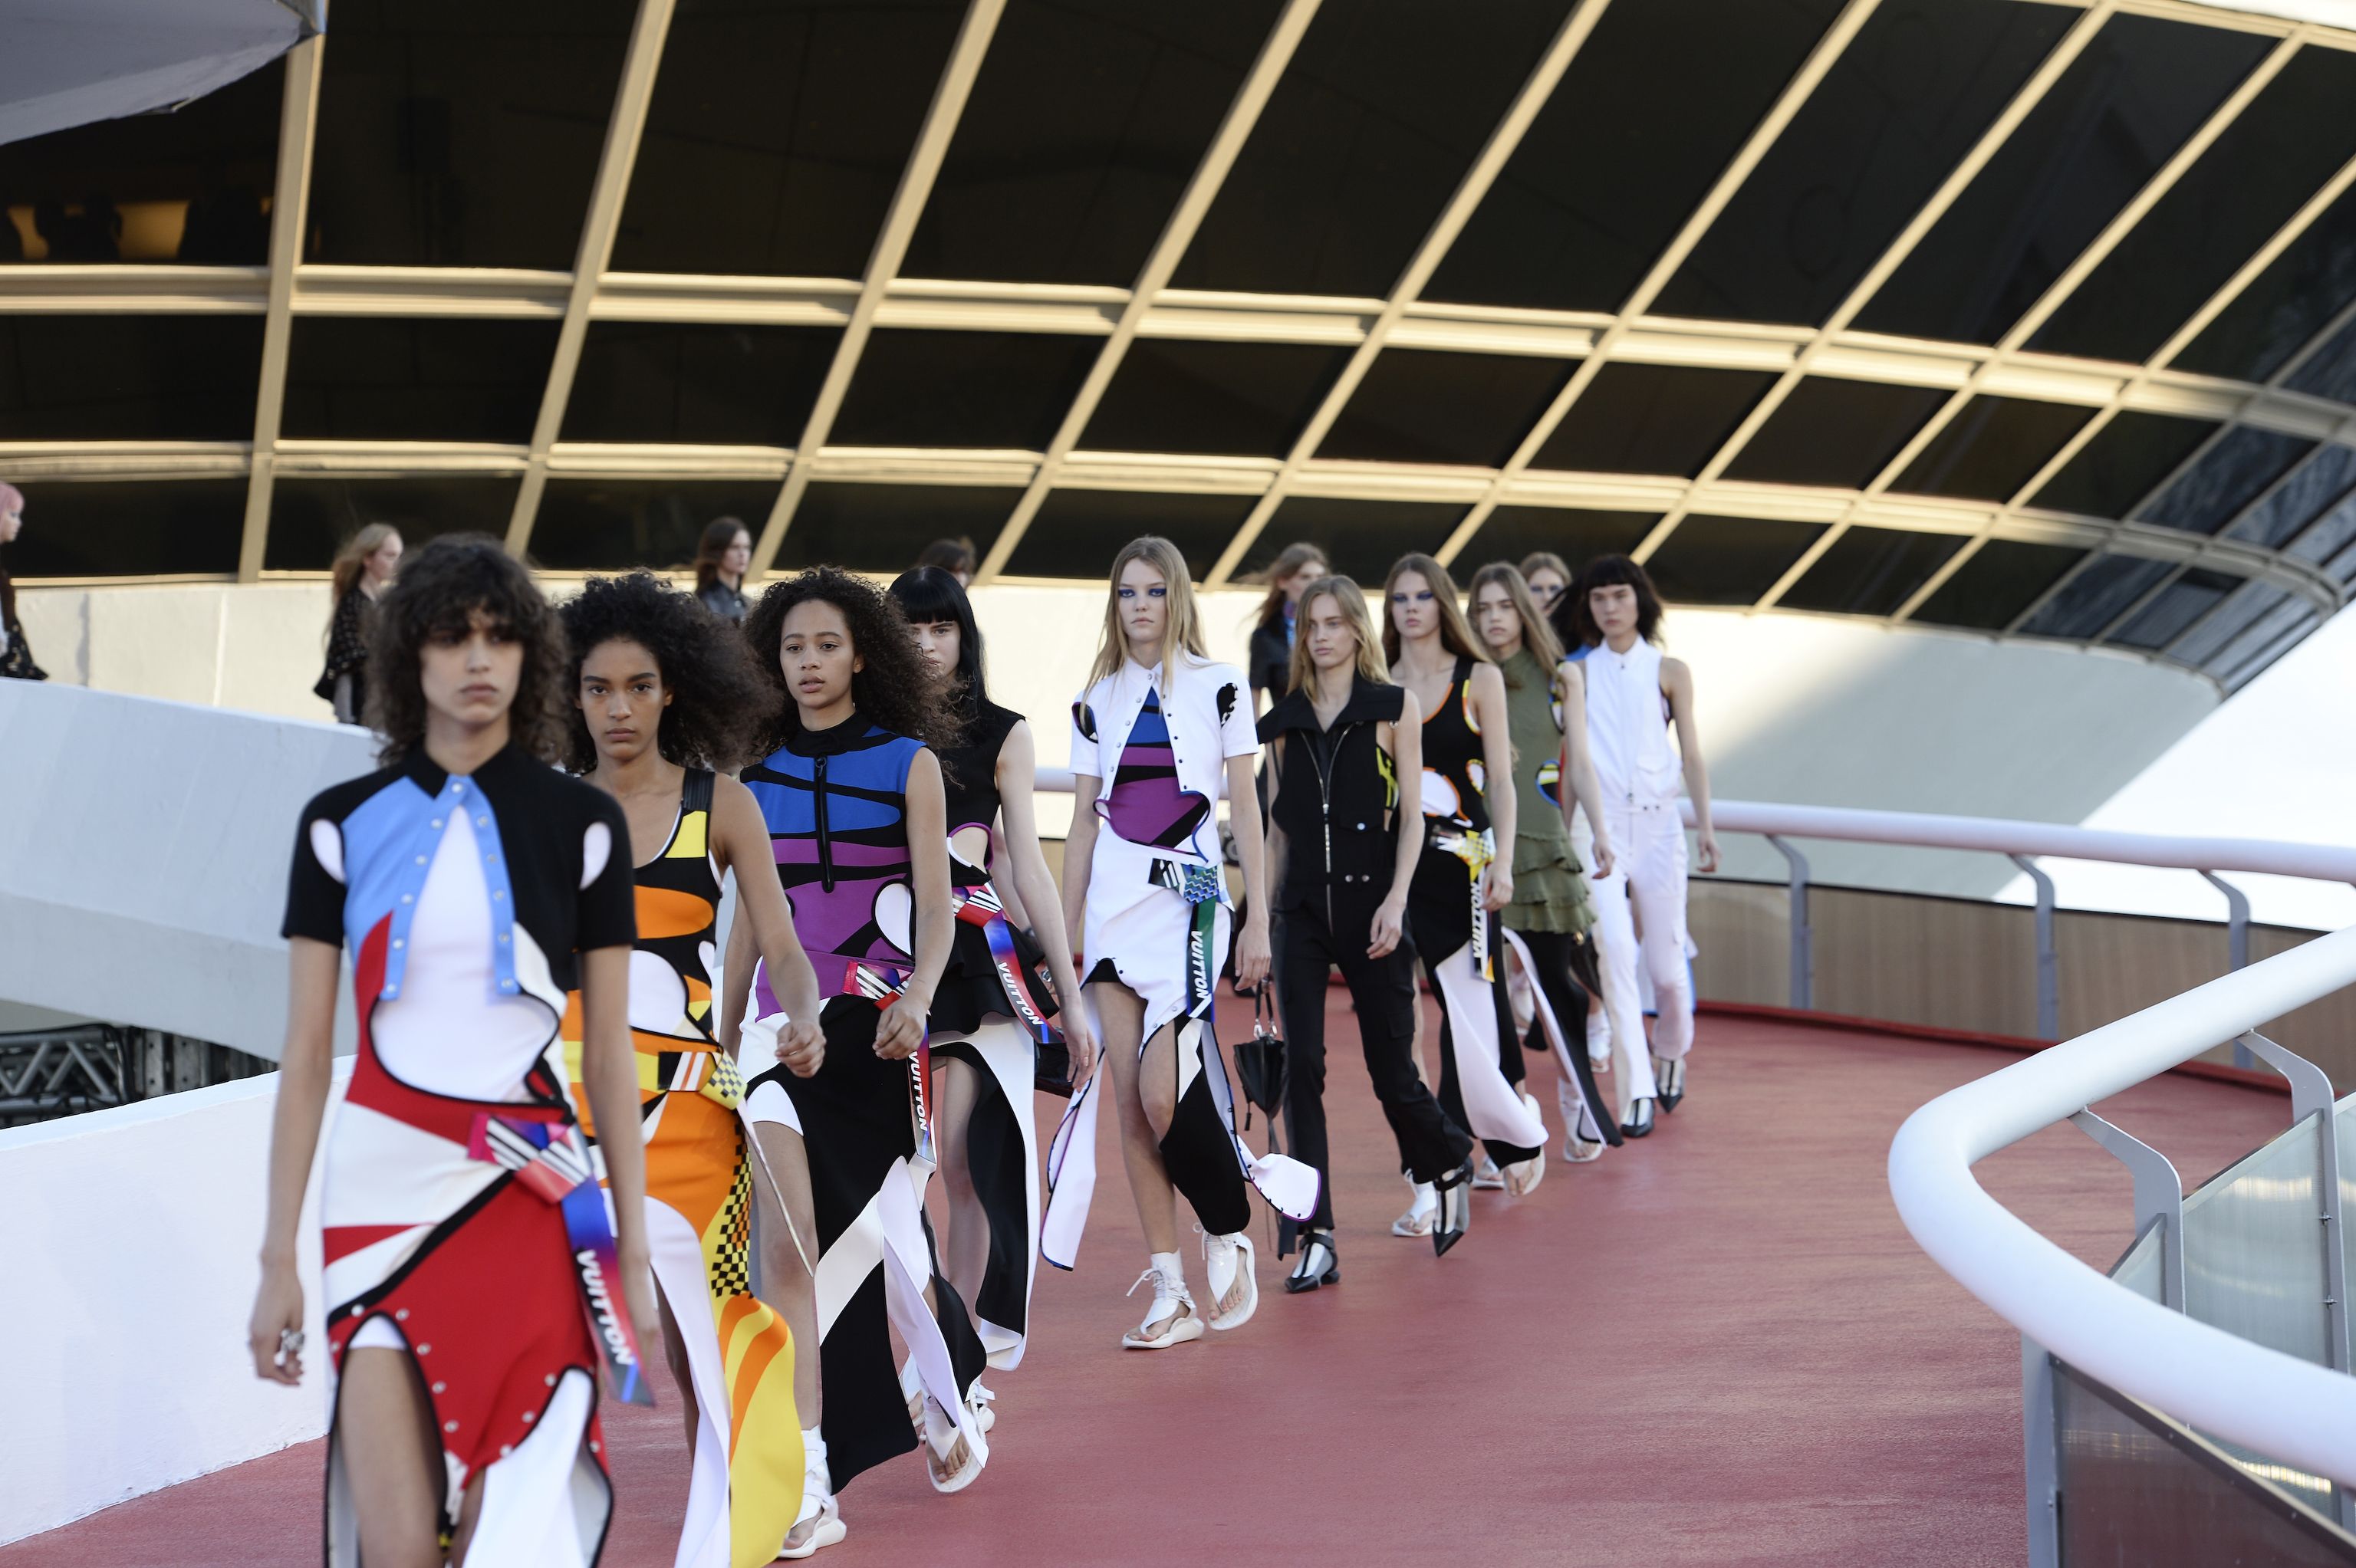 Louis Vuitton to unveil its cruise collection in California